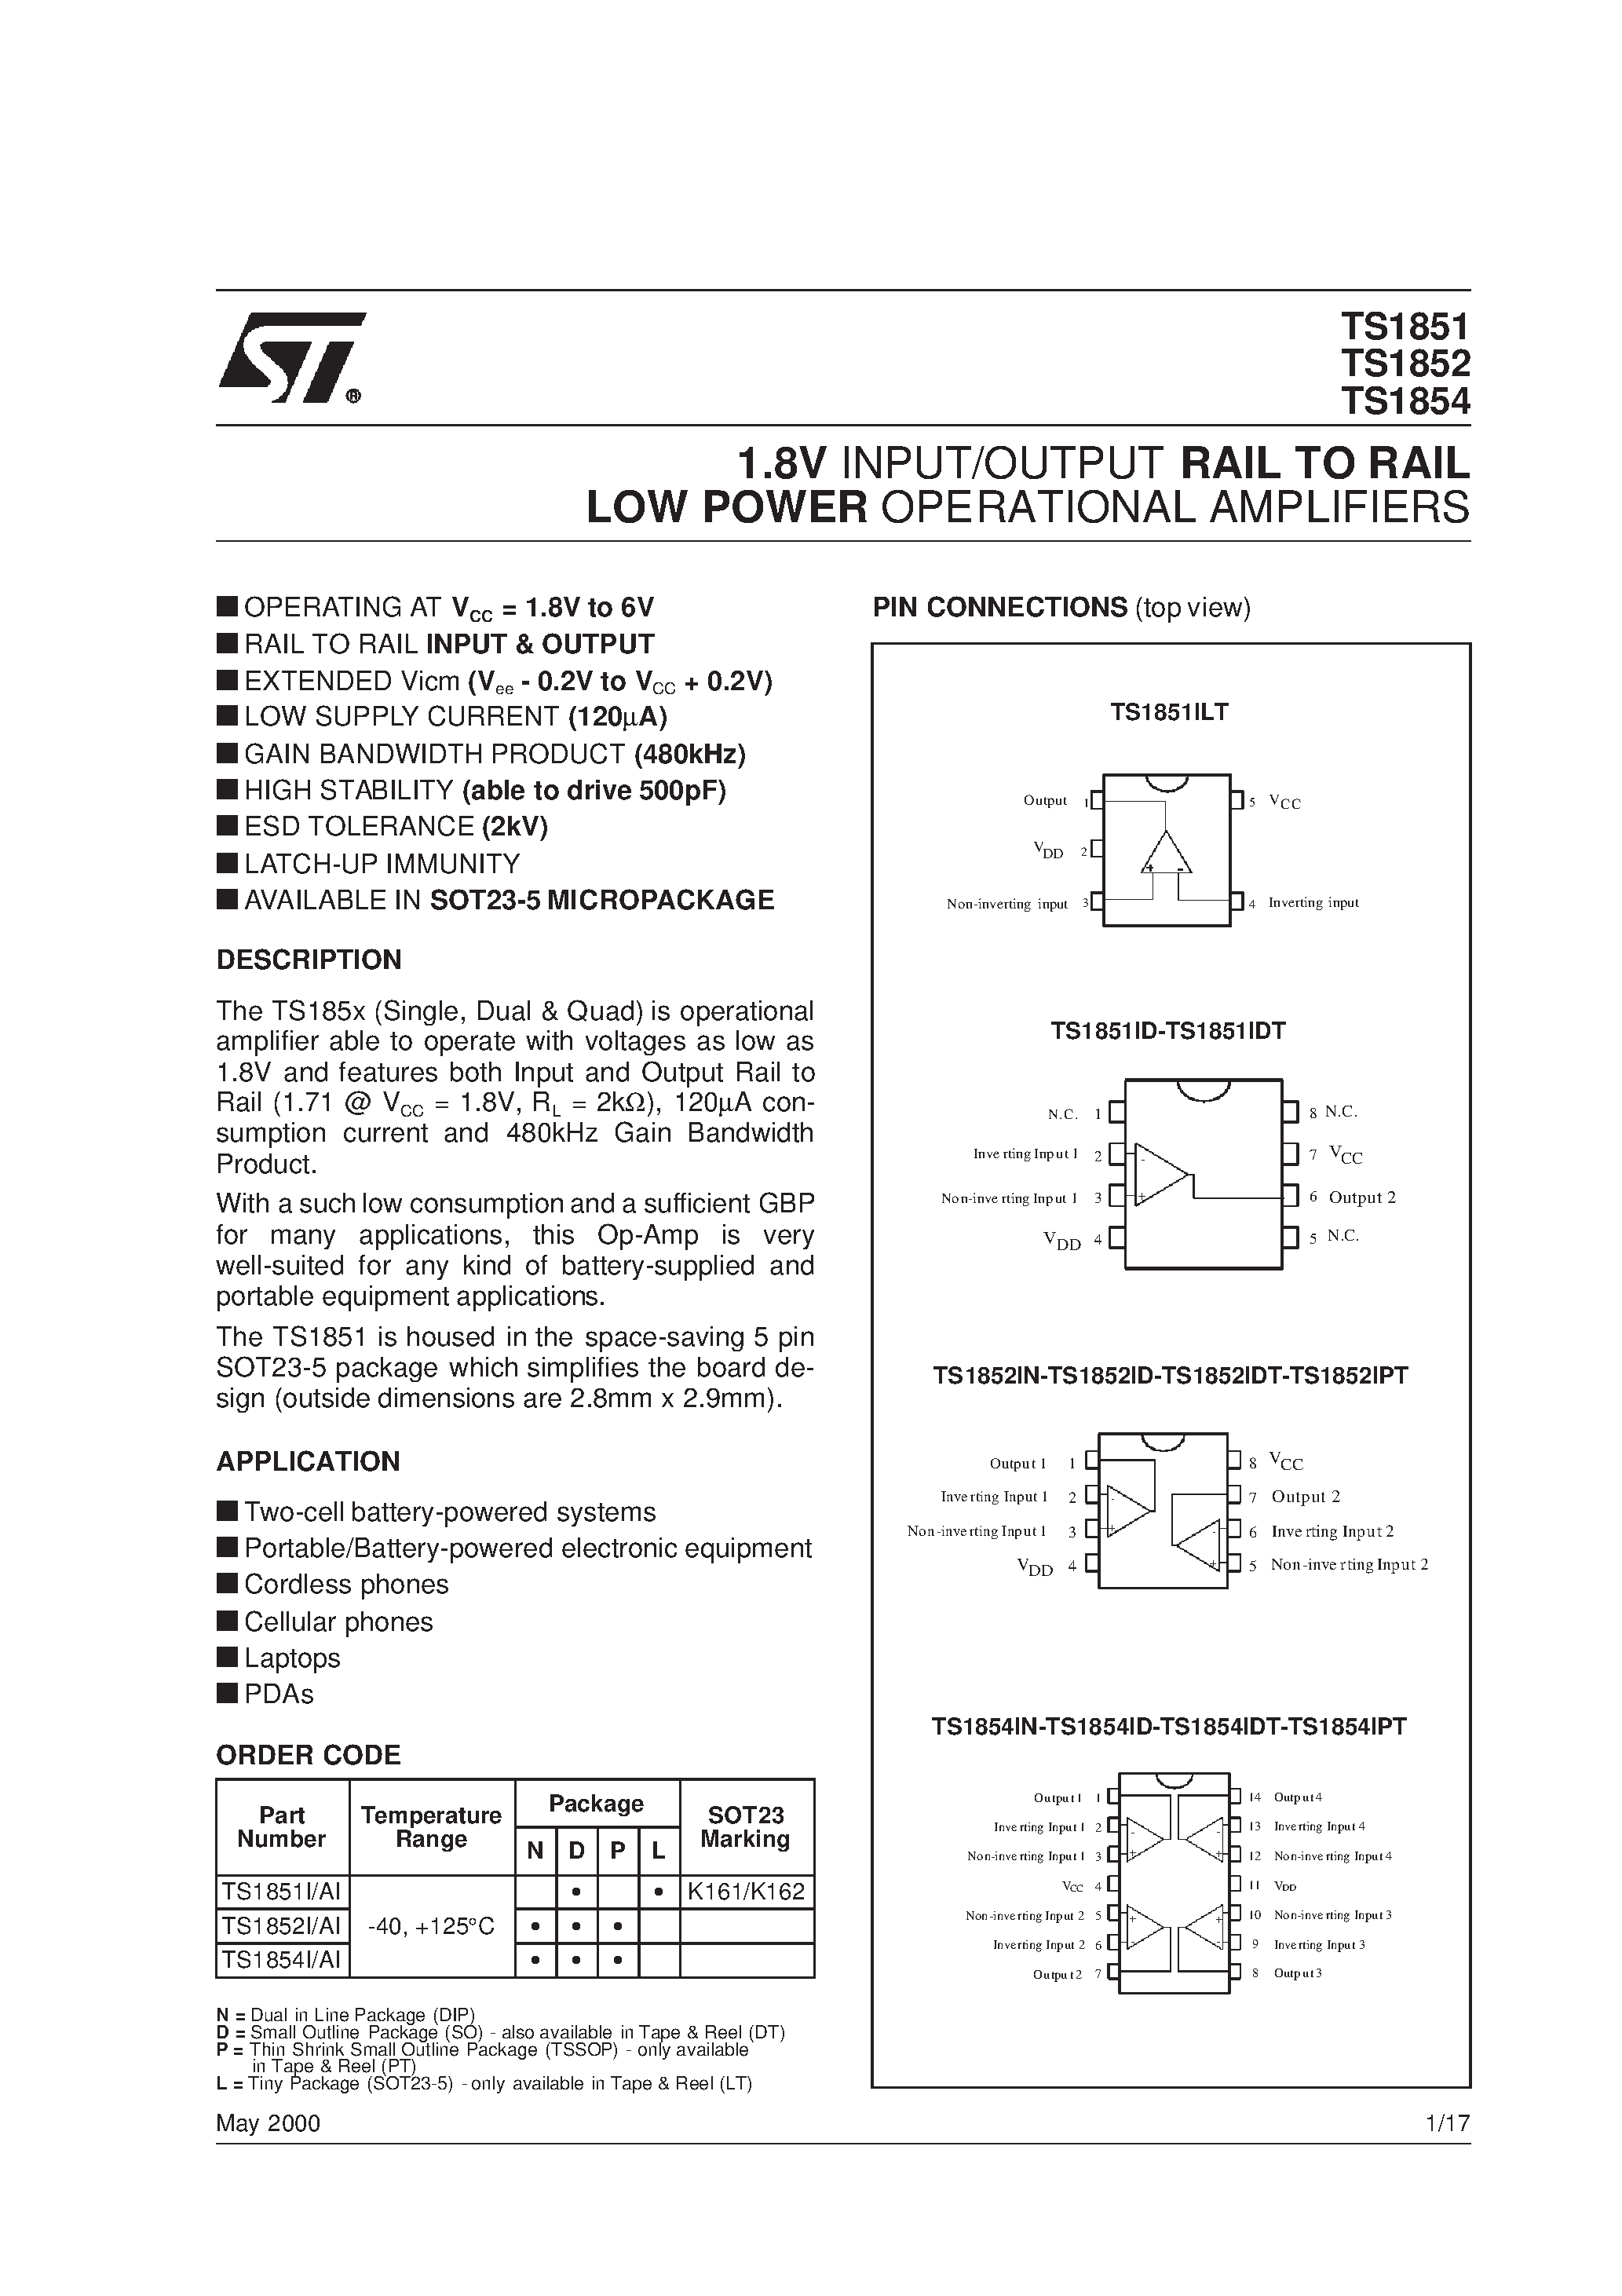 Datasheet TS1854I - 1.8V INPUT/OUTPUT RAIL TO RAIL LOW POWER OPERATIONAL AMPLIFIERS page 1